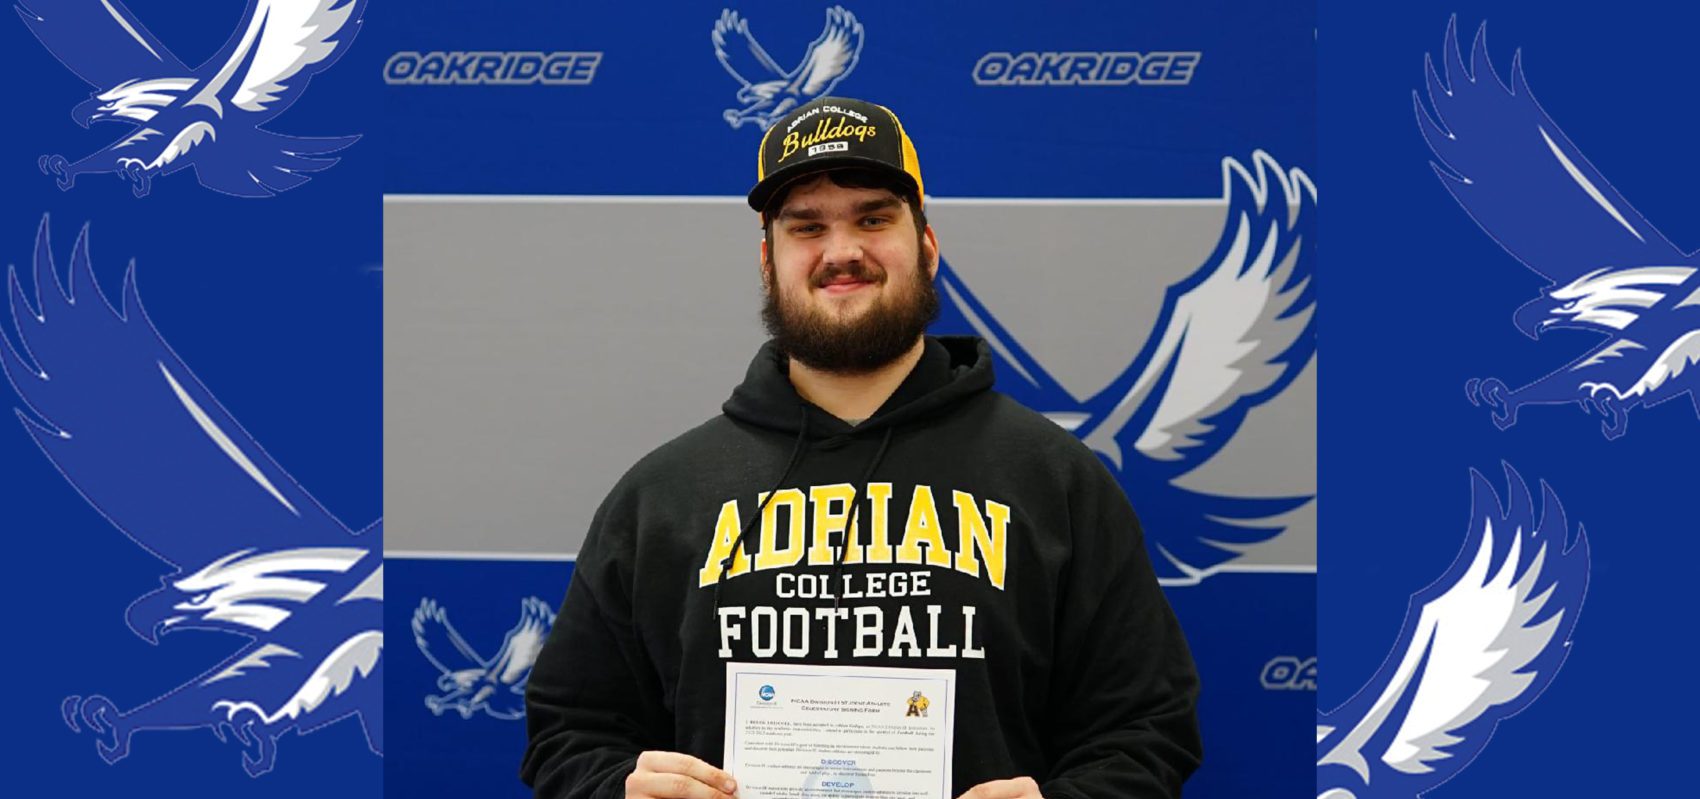 Oakridge’s Derek Driscoll decides on Adrian College to continue his football career